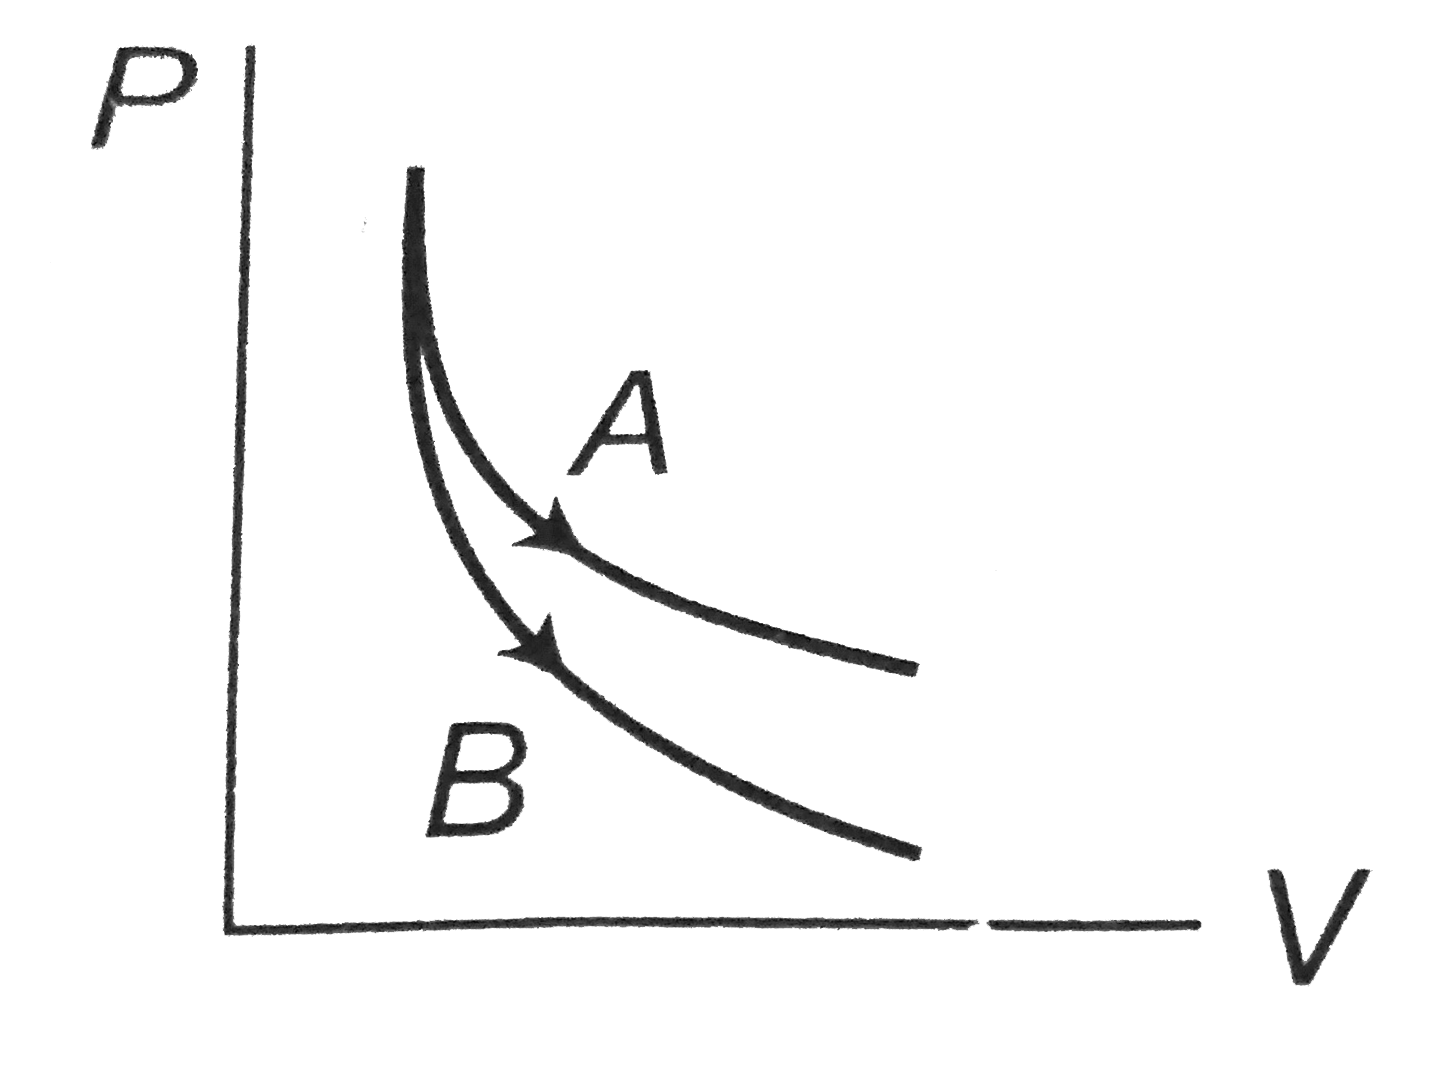 Consider the process A and B shown in the figure. It is possible that